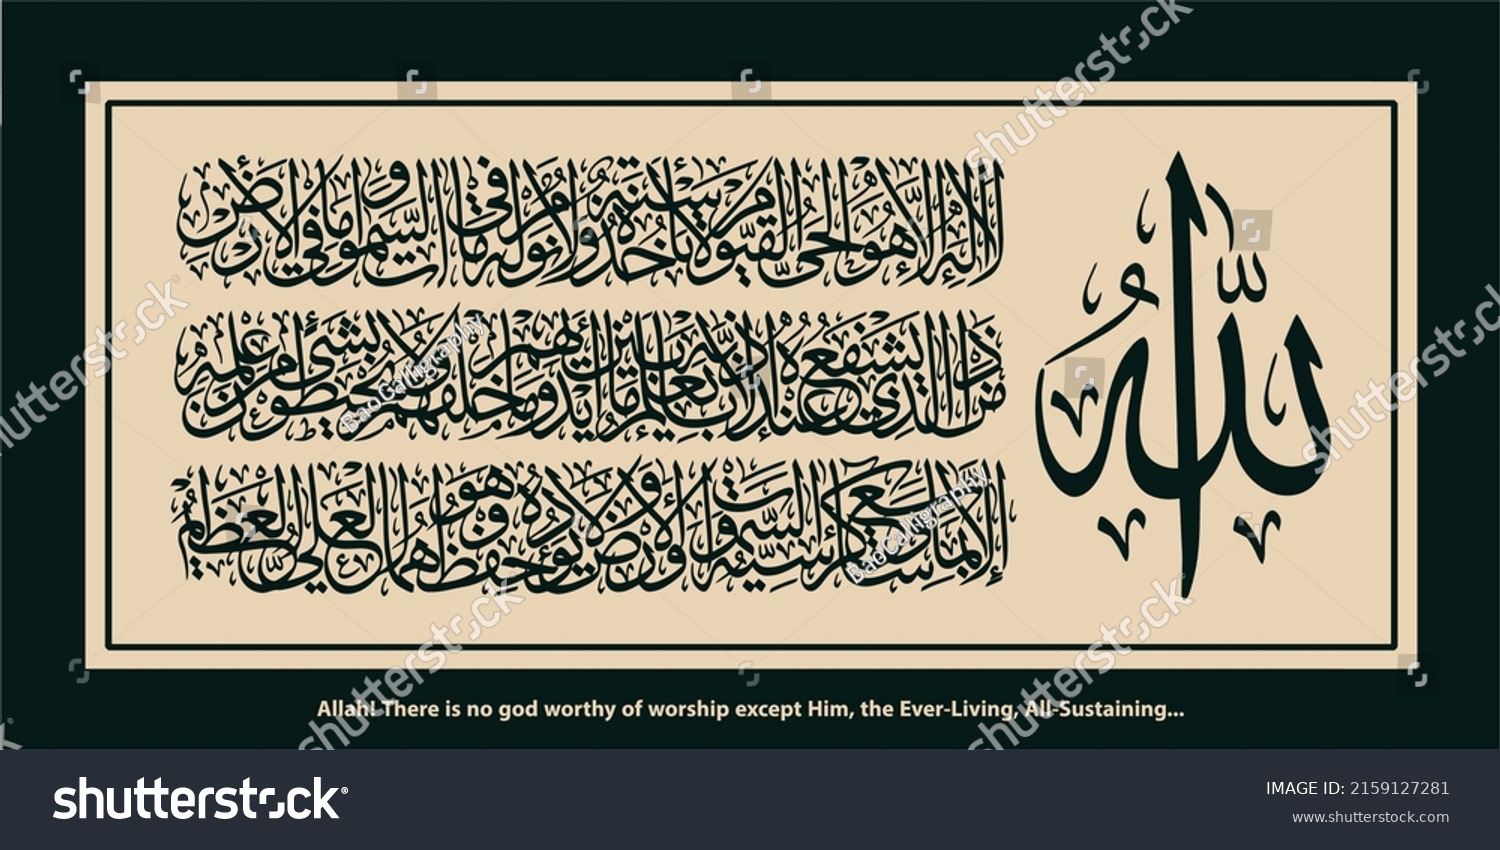 SVG of Islamic calligraphic Name of God And Name of Prophet Muhamad with verse from Quran Baqarah Ayat Al Kursi translated: 